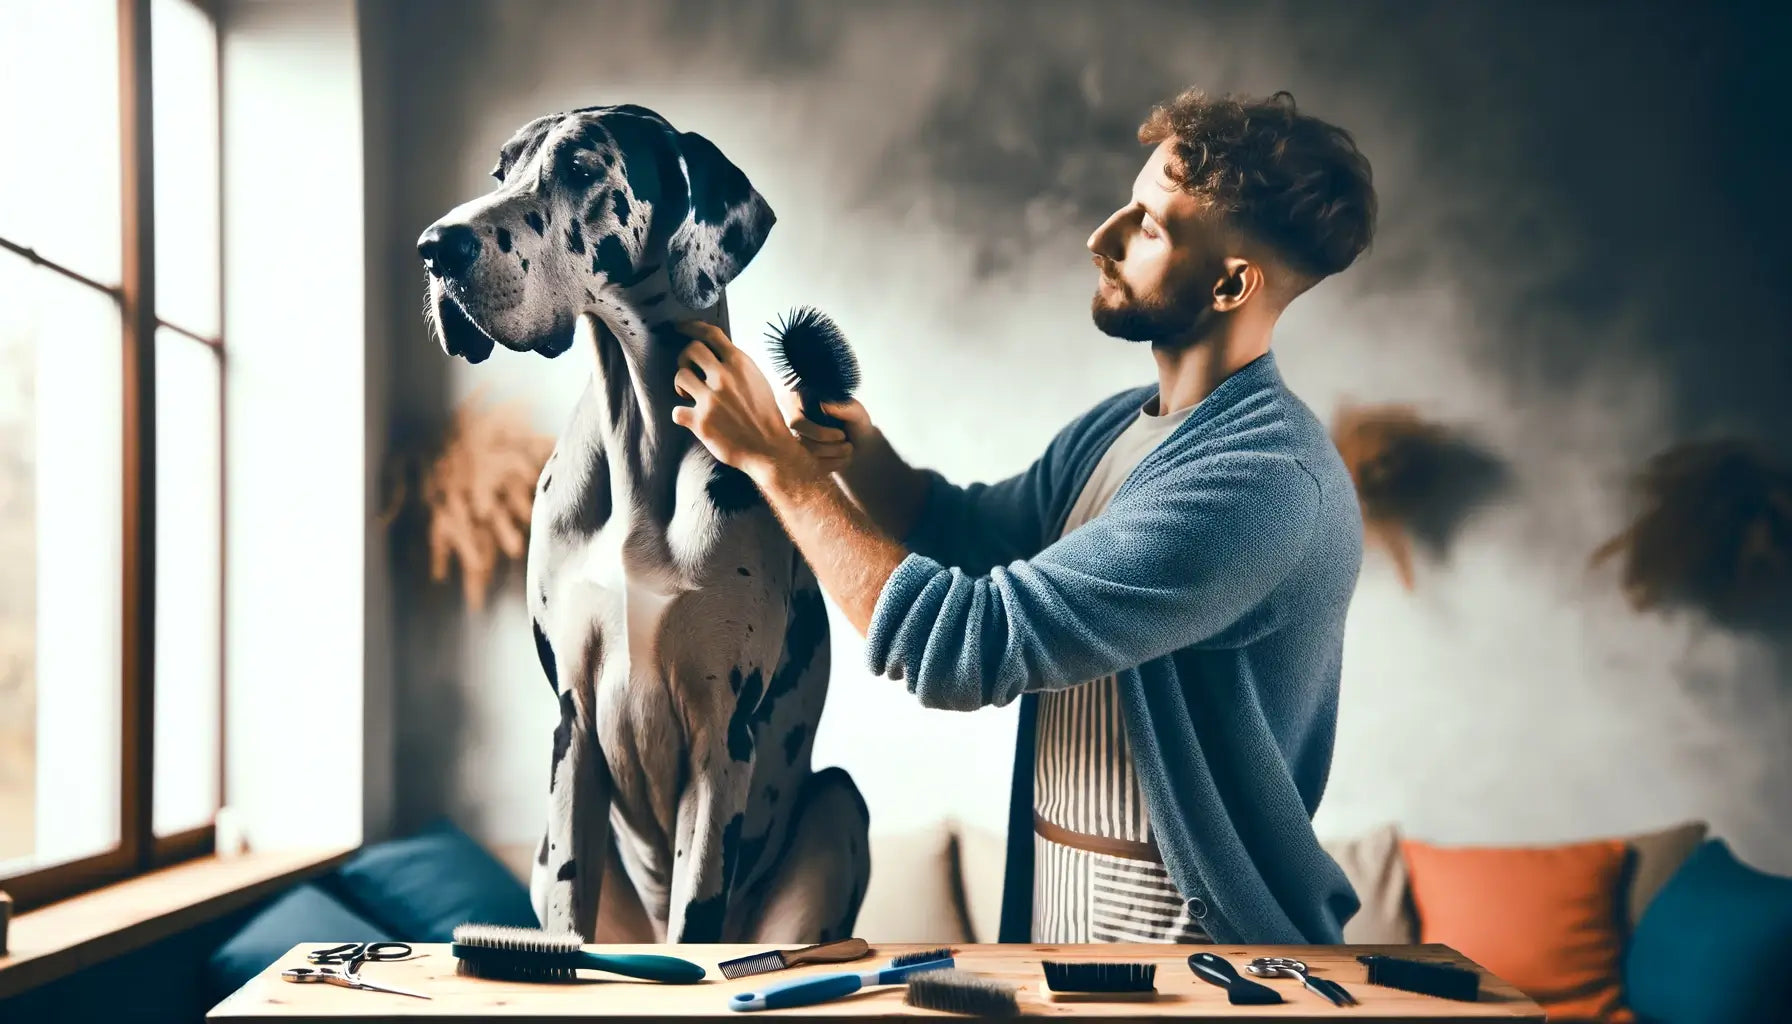 A Merle Great Dane being groomed by its owner at home, with the owner brushing the dog's distinctive merle coat.